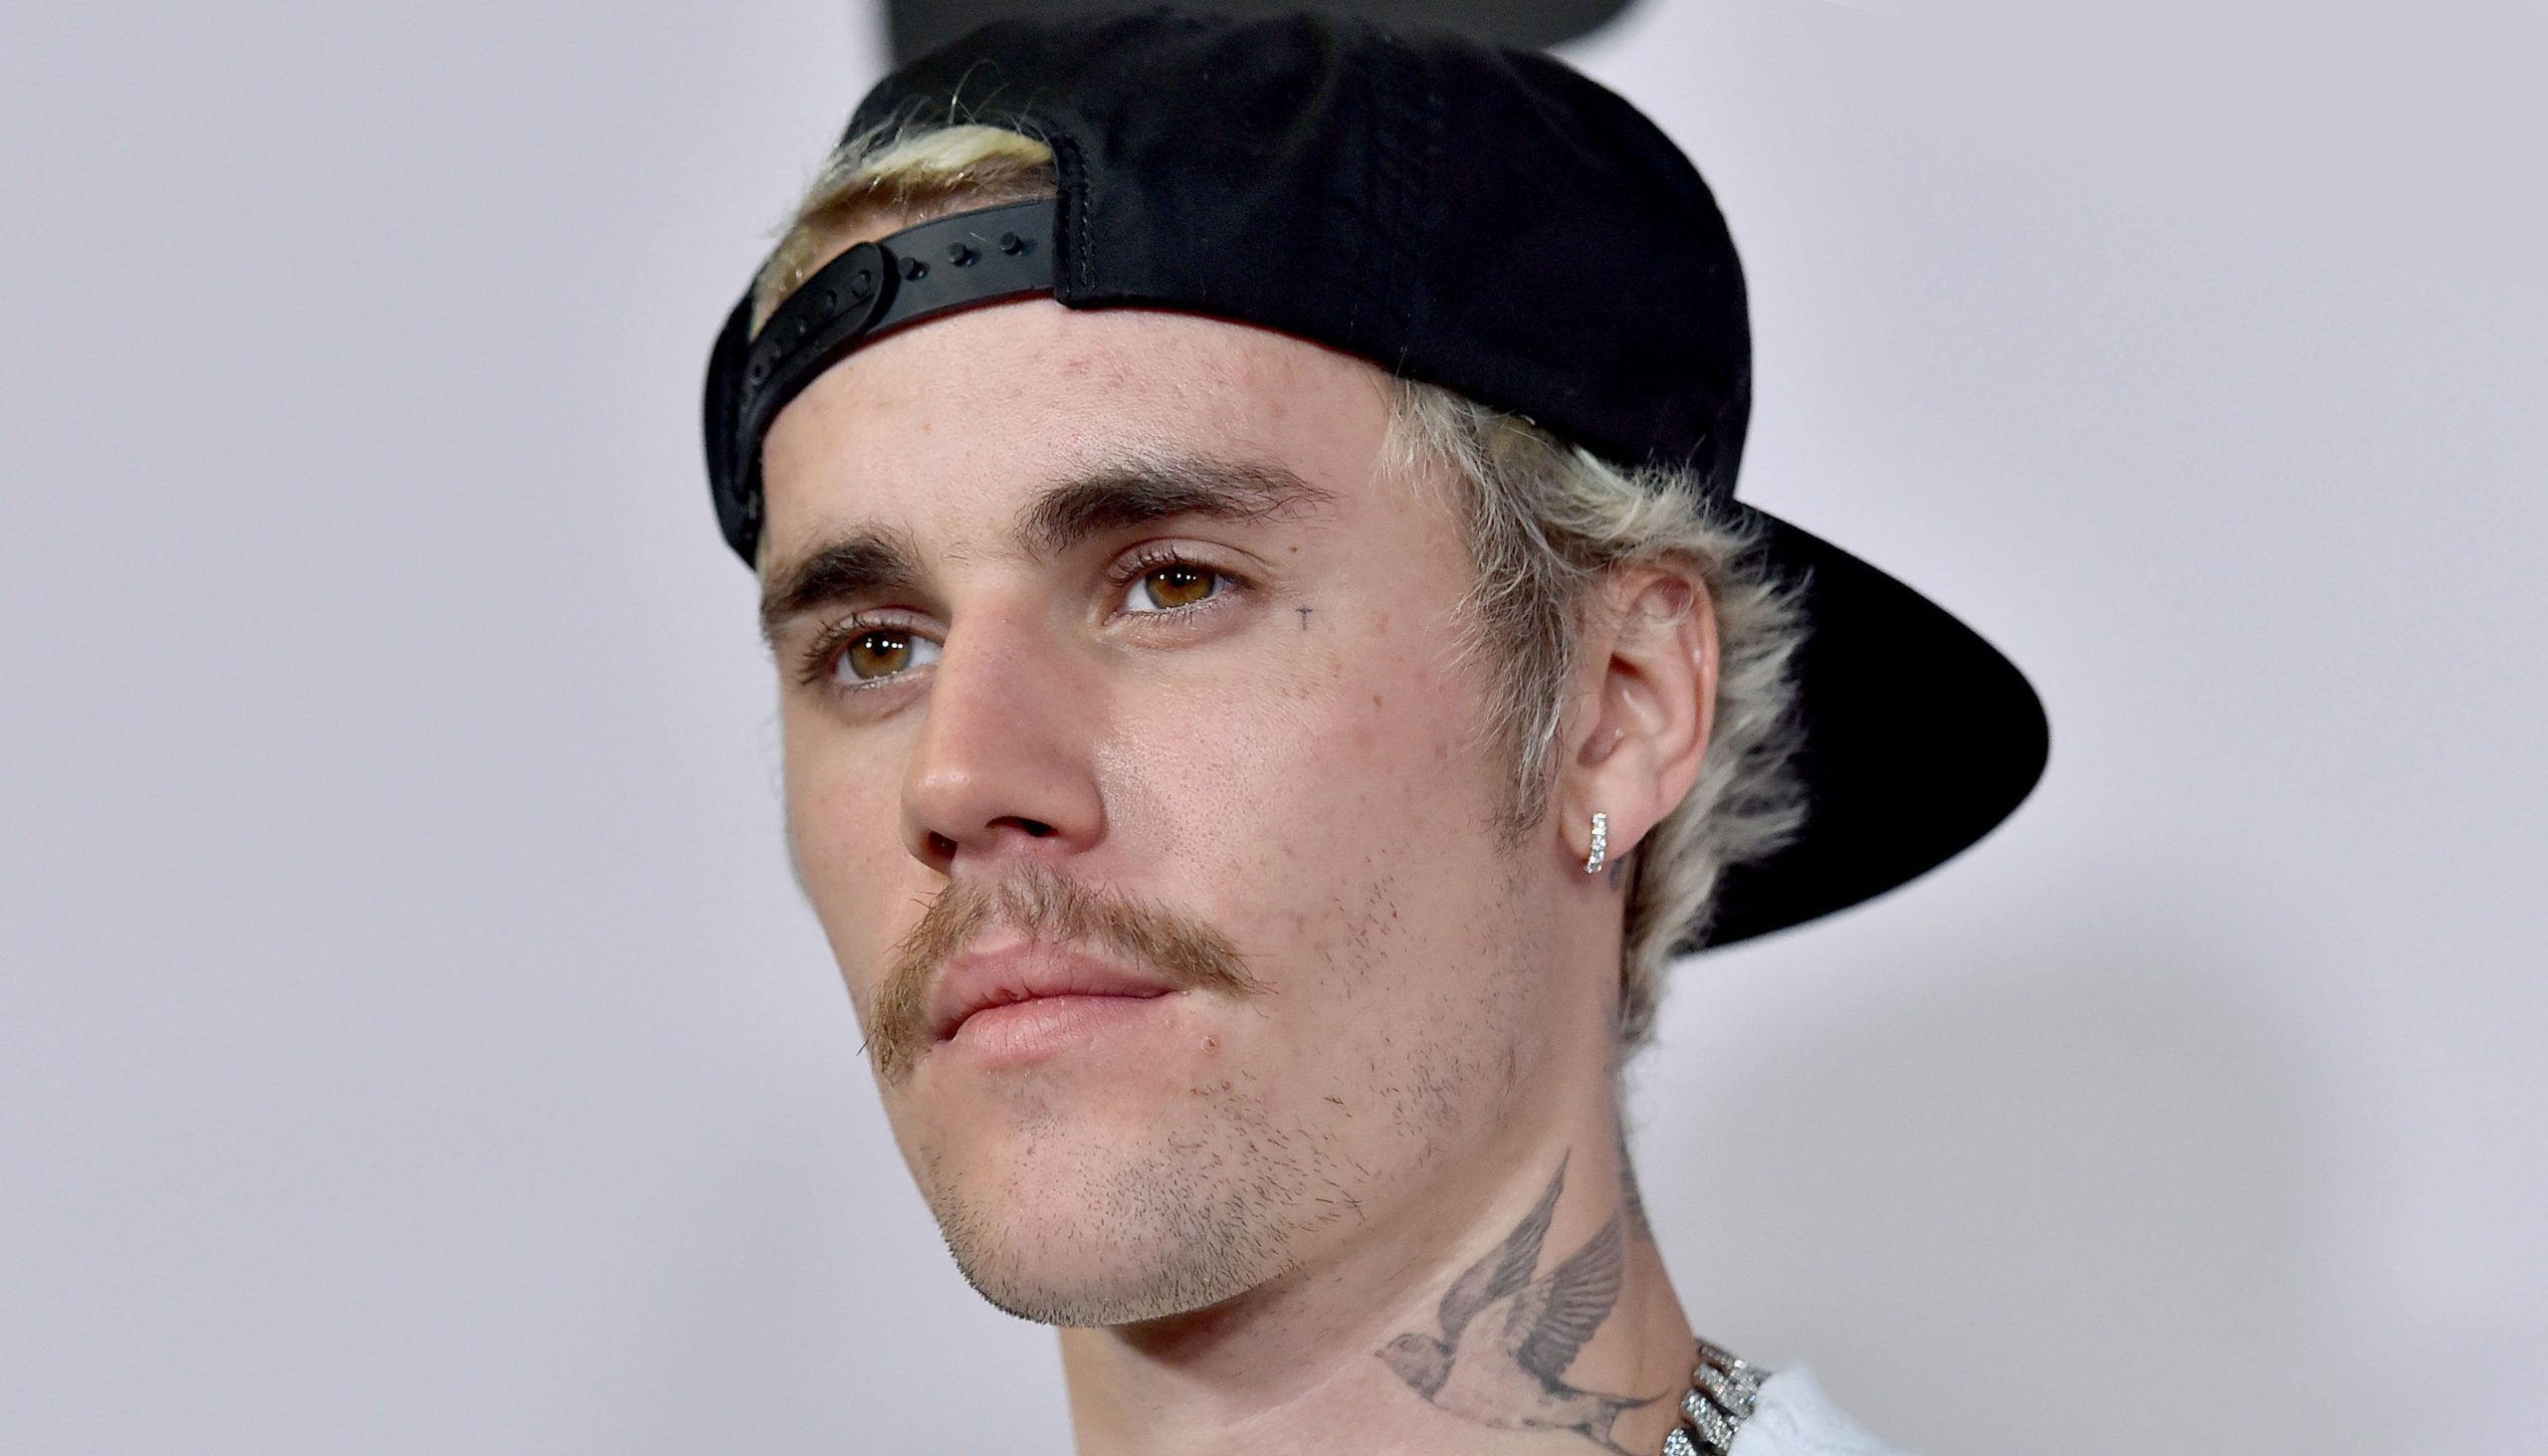 Justin Bieber Gets Realistic Rose Neck Tattoo From Dr. Woo